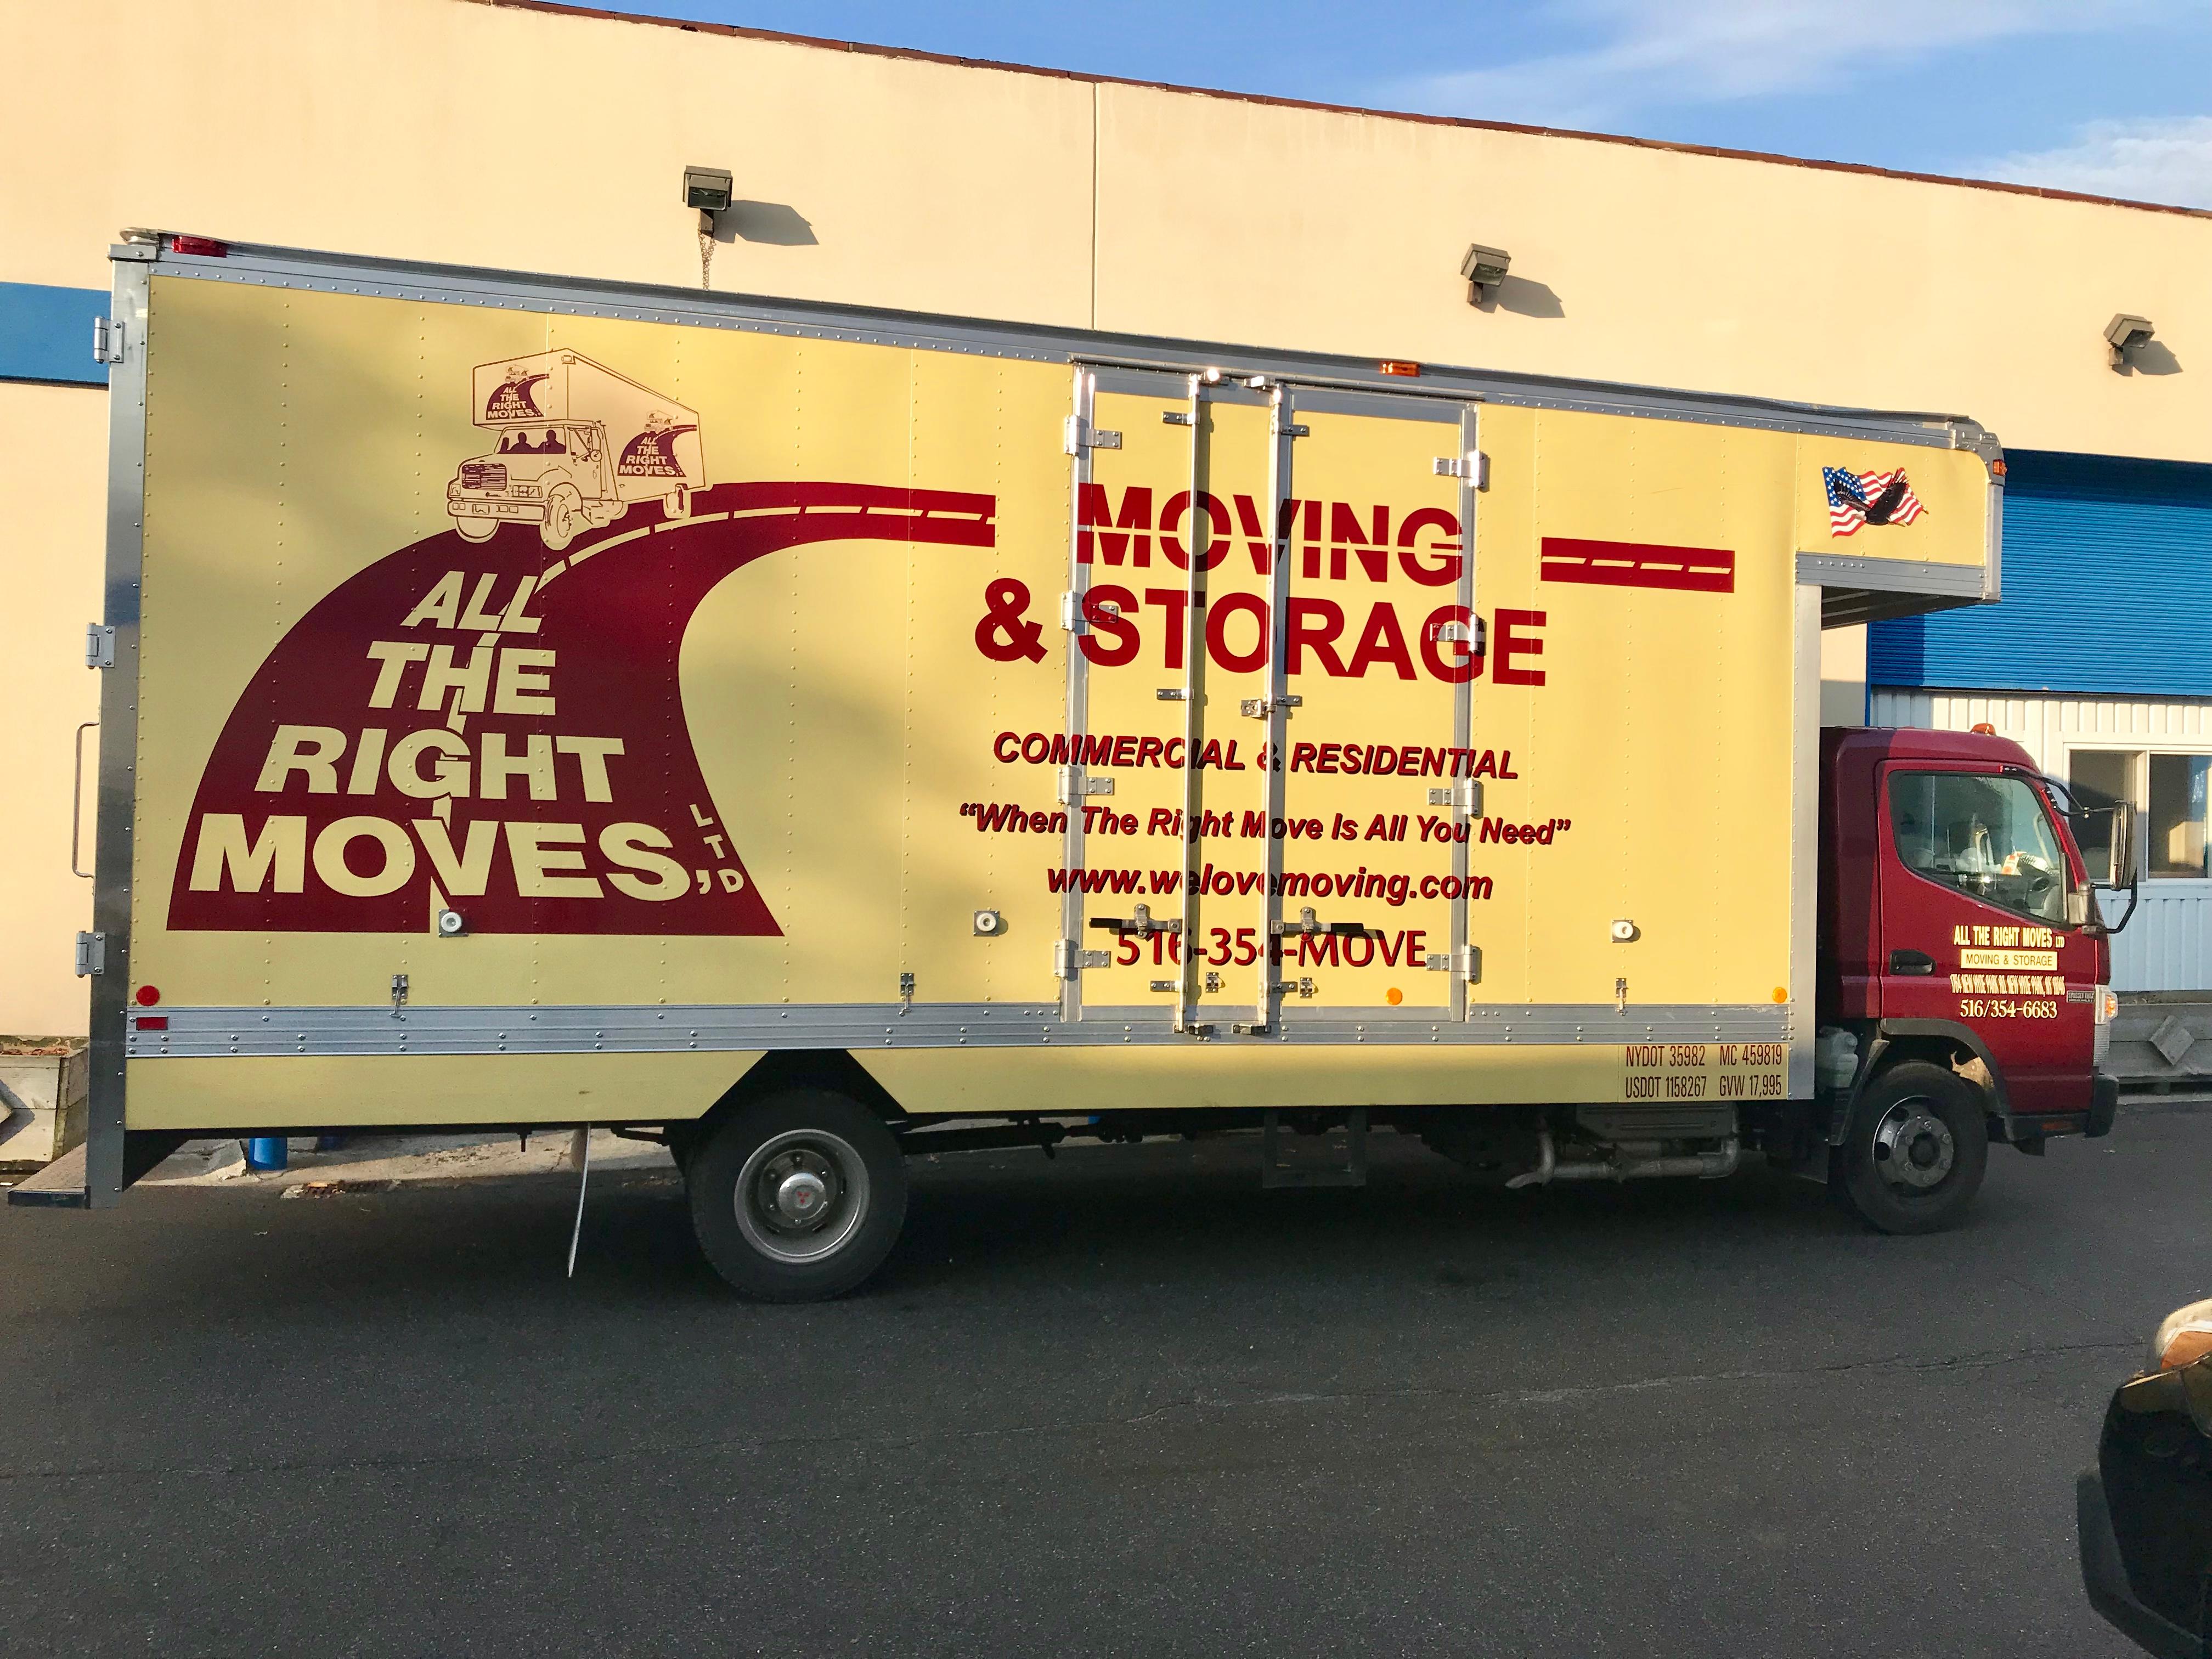 All The Right Moves Ltd., Moving & Storage Photo